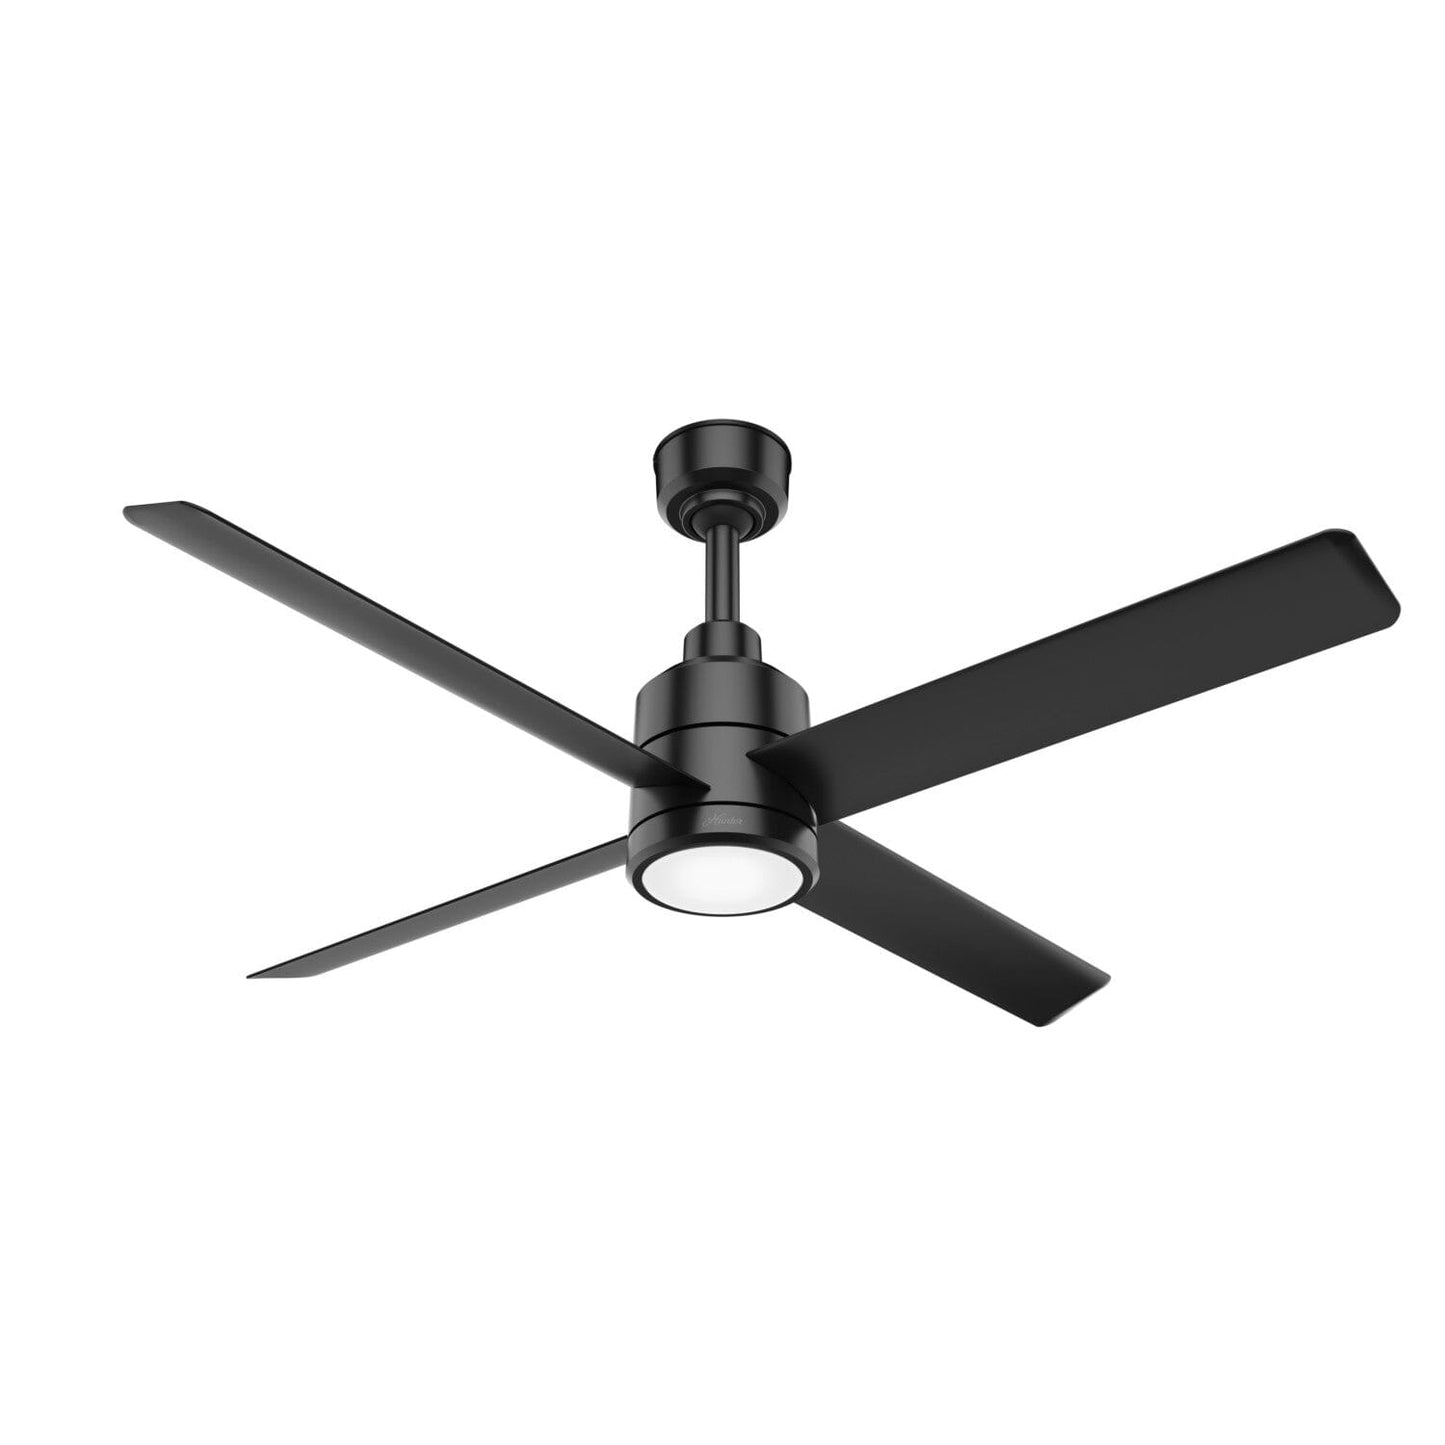 Trak Outdoor with light 72 inches 120V Ceiling Fans Hunter Black - Black 